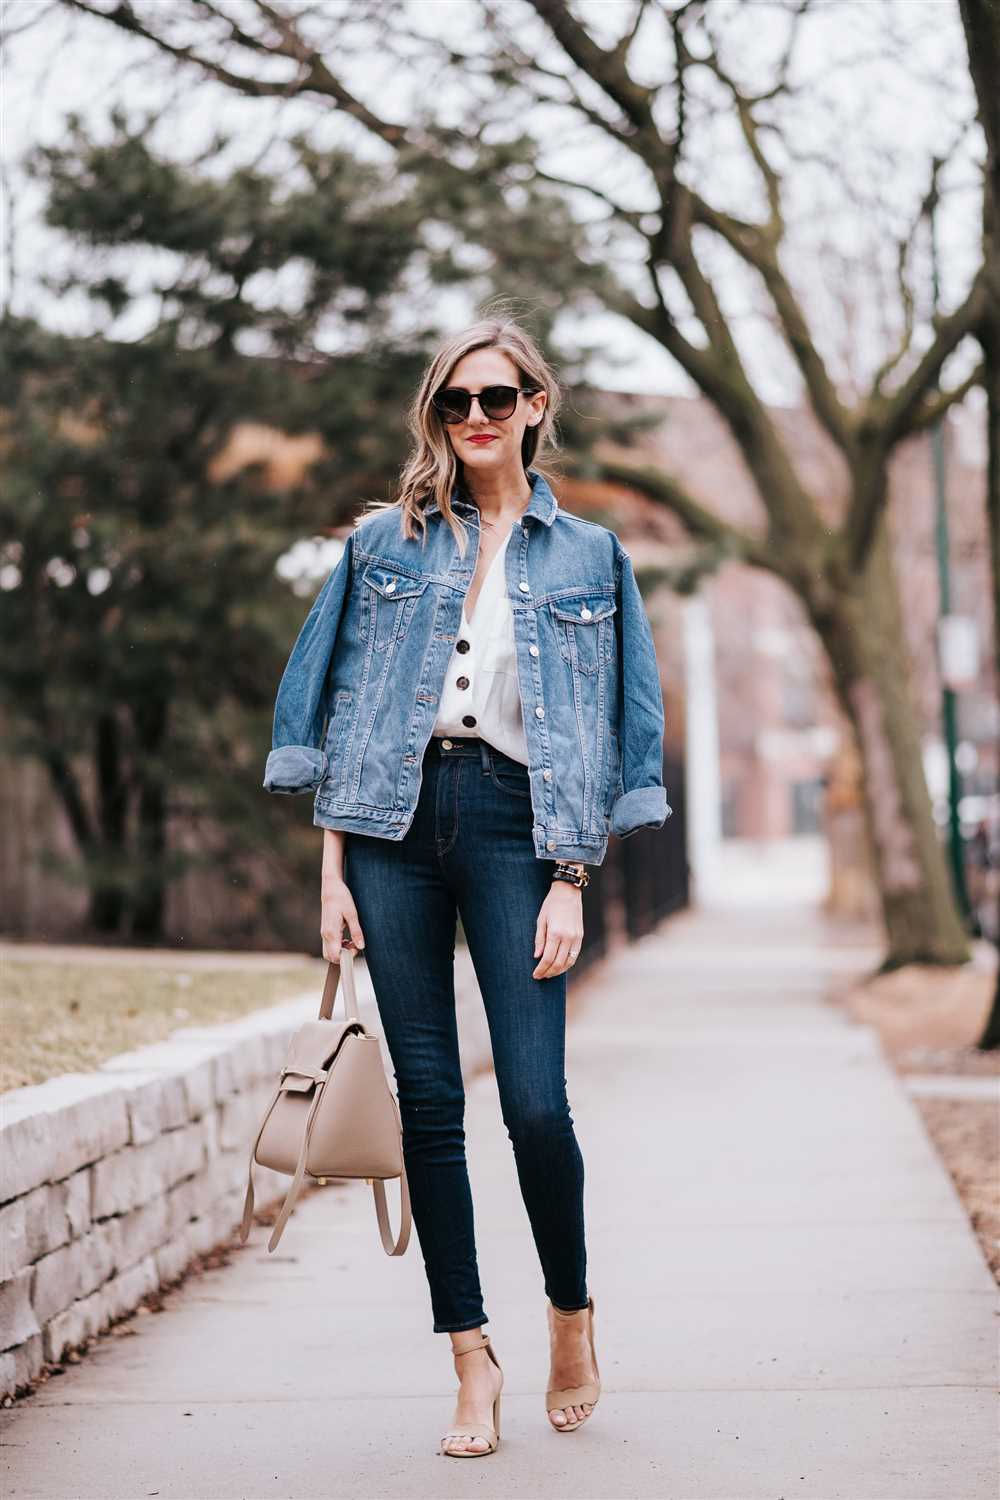 How to Style an Oversized Denim Jacket